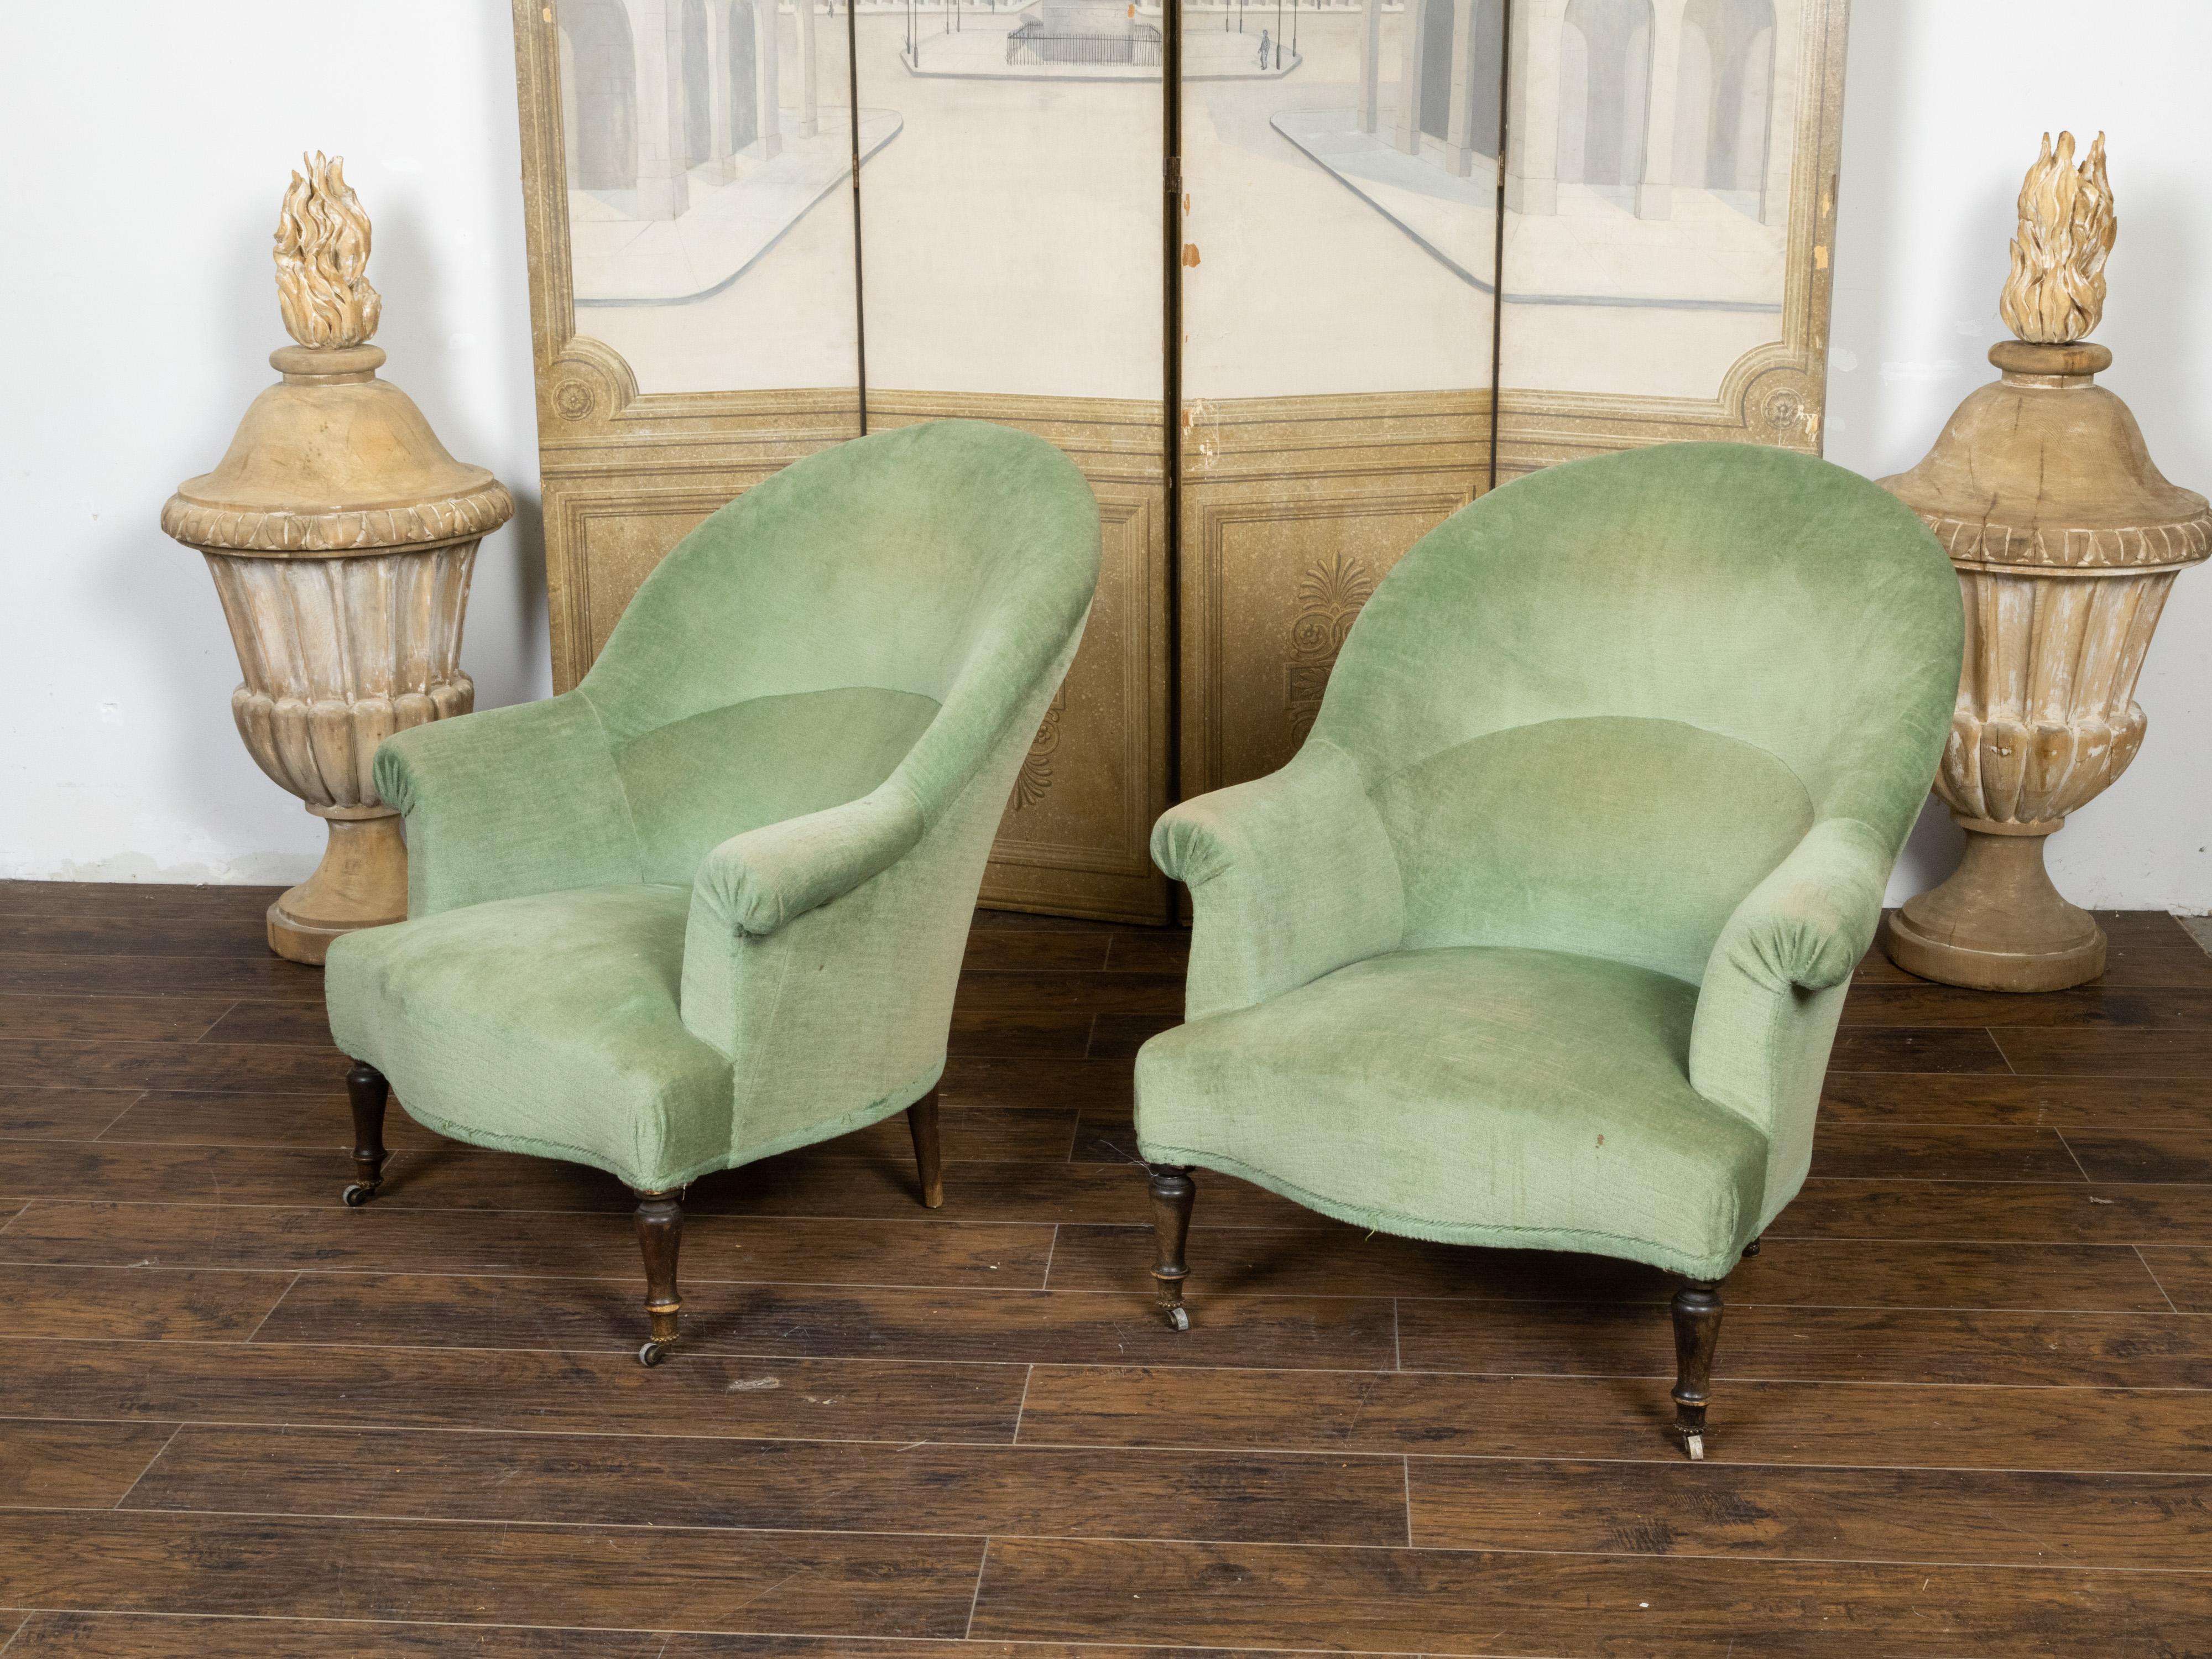 Pair of French Turn of the Century Bergère Chairs with Green Velvet Upholstery In Good Condition For Sale In Atlanta, GA